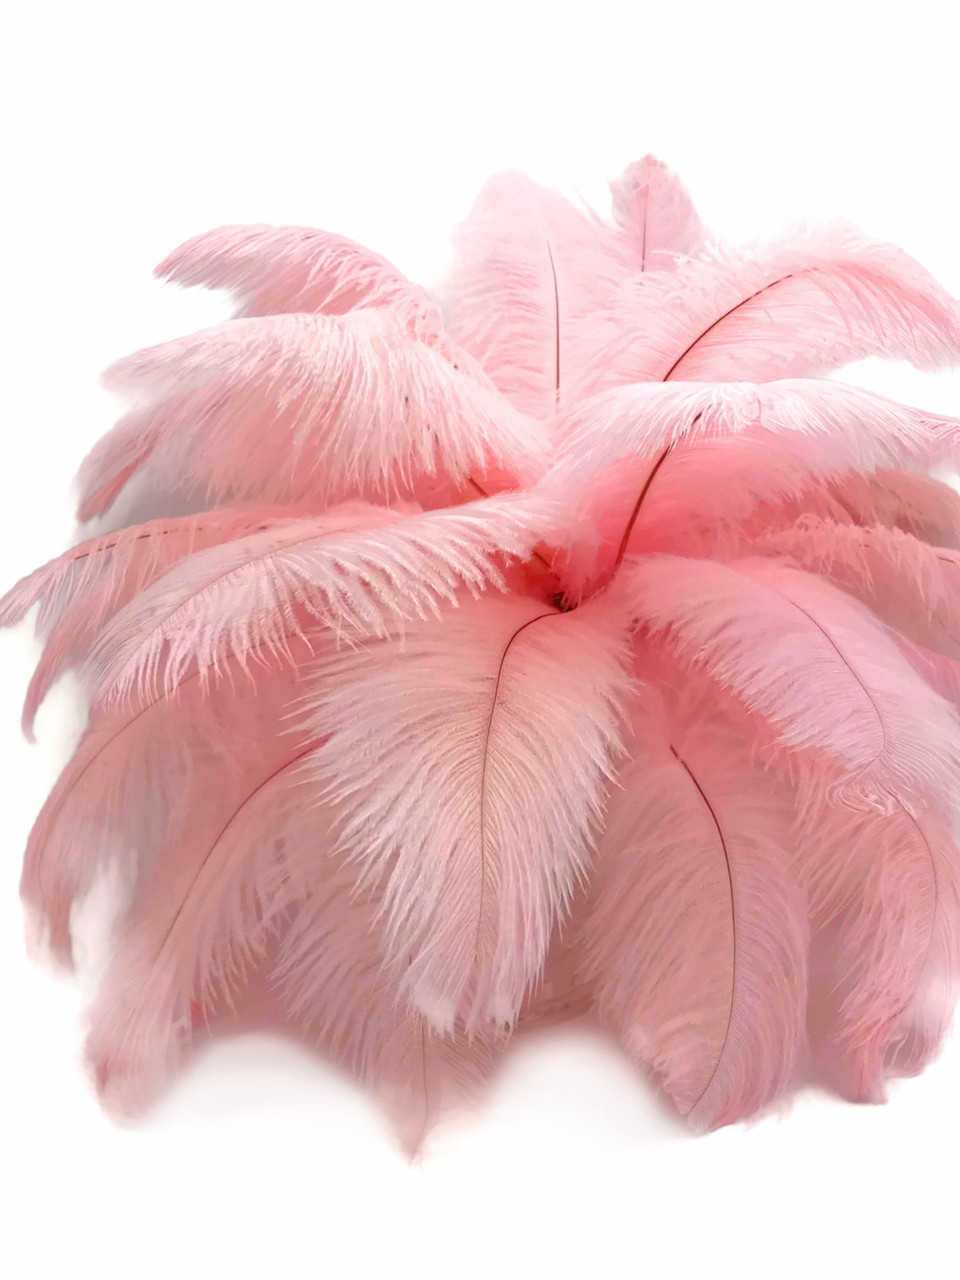 50Pcs Pink Feathers 10~12 inches,Beautiful Long Feather for  Crafts（26-31CM）,Big Size Bilateral Natural Goose Feather,for Wedding Dress  and Party